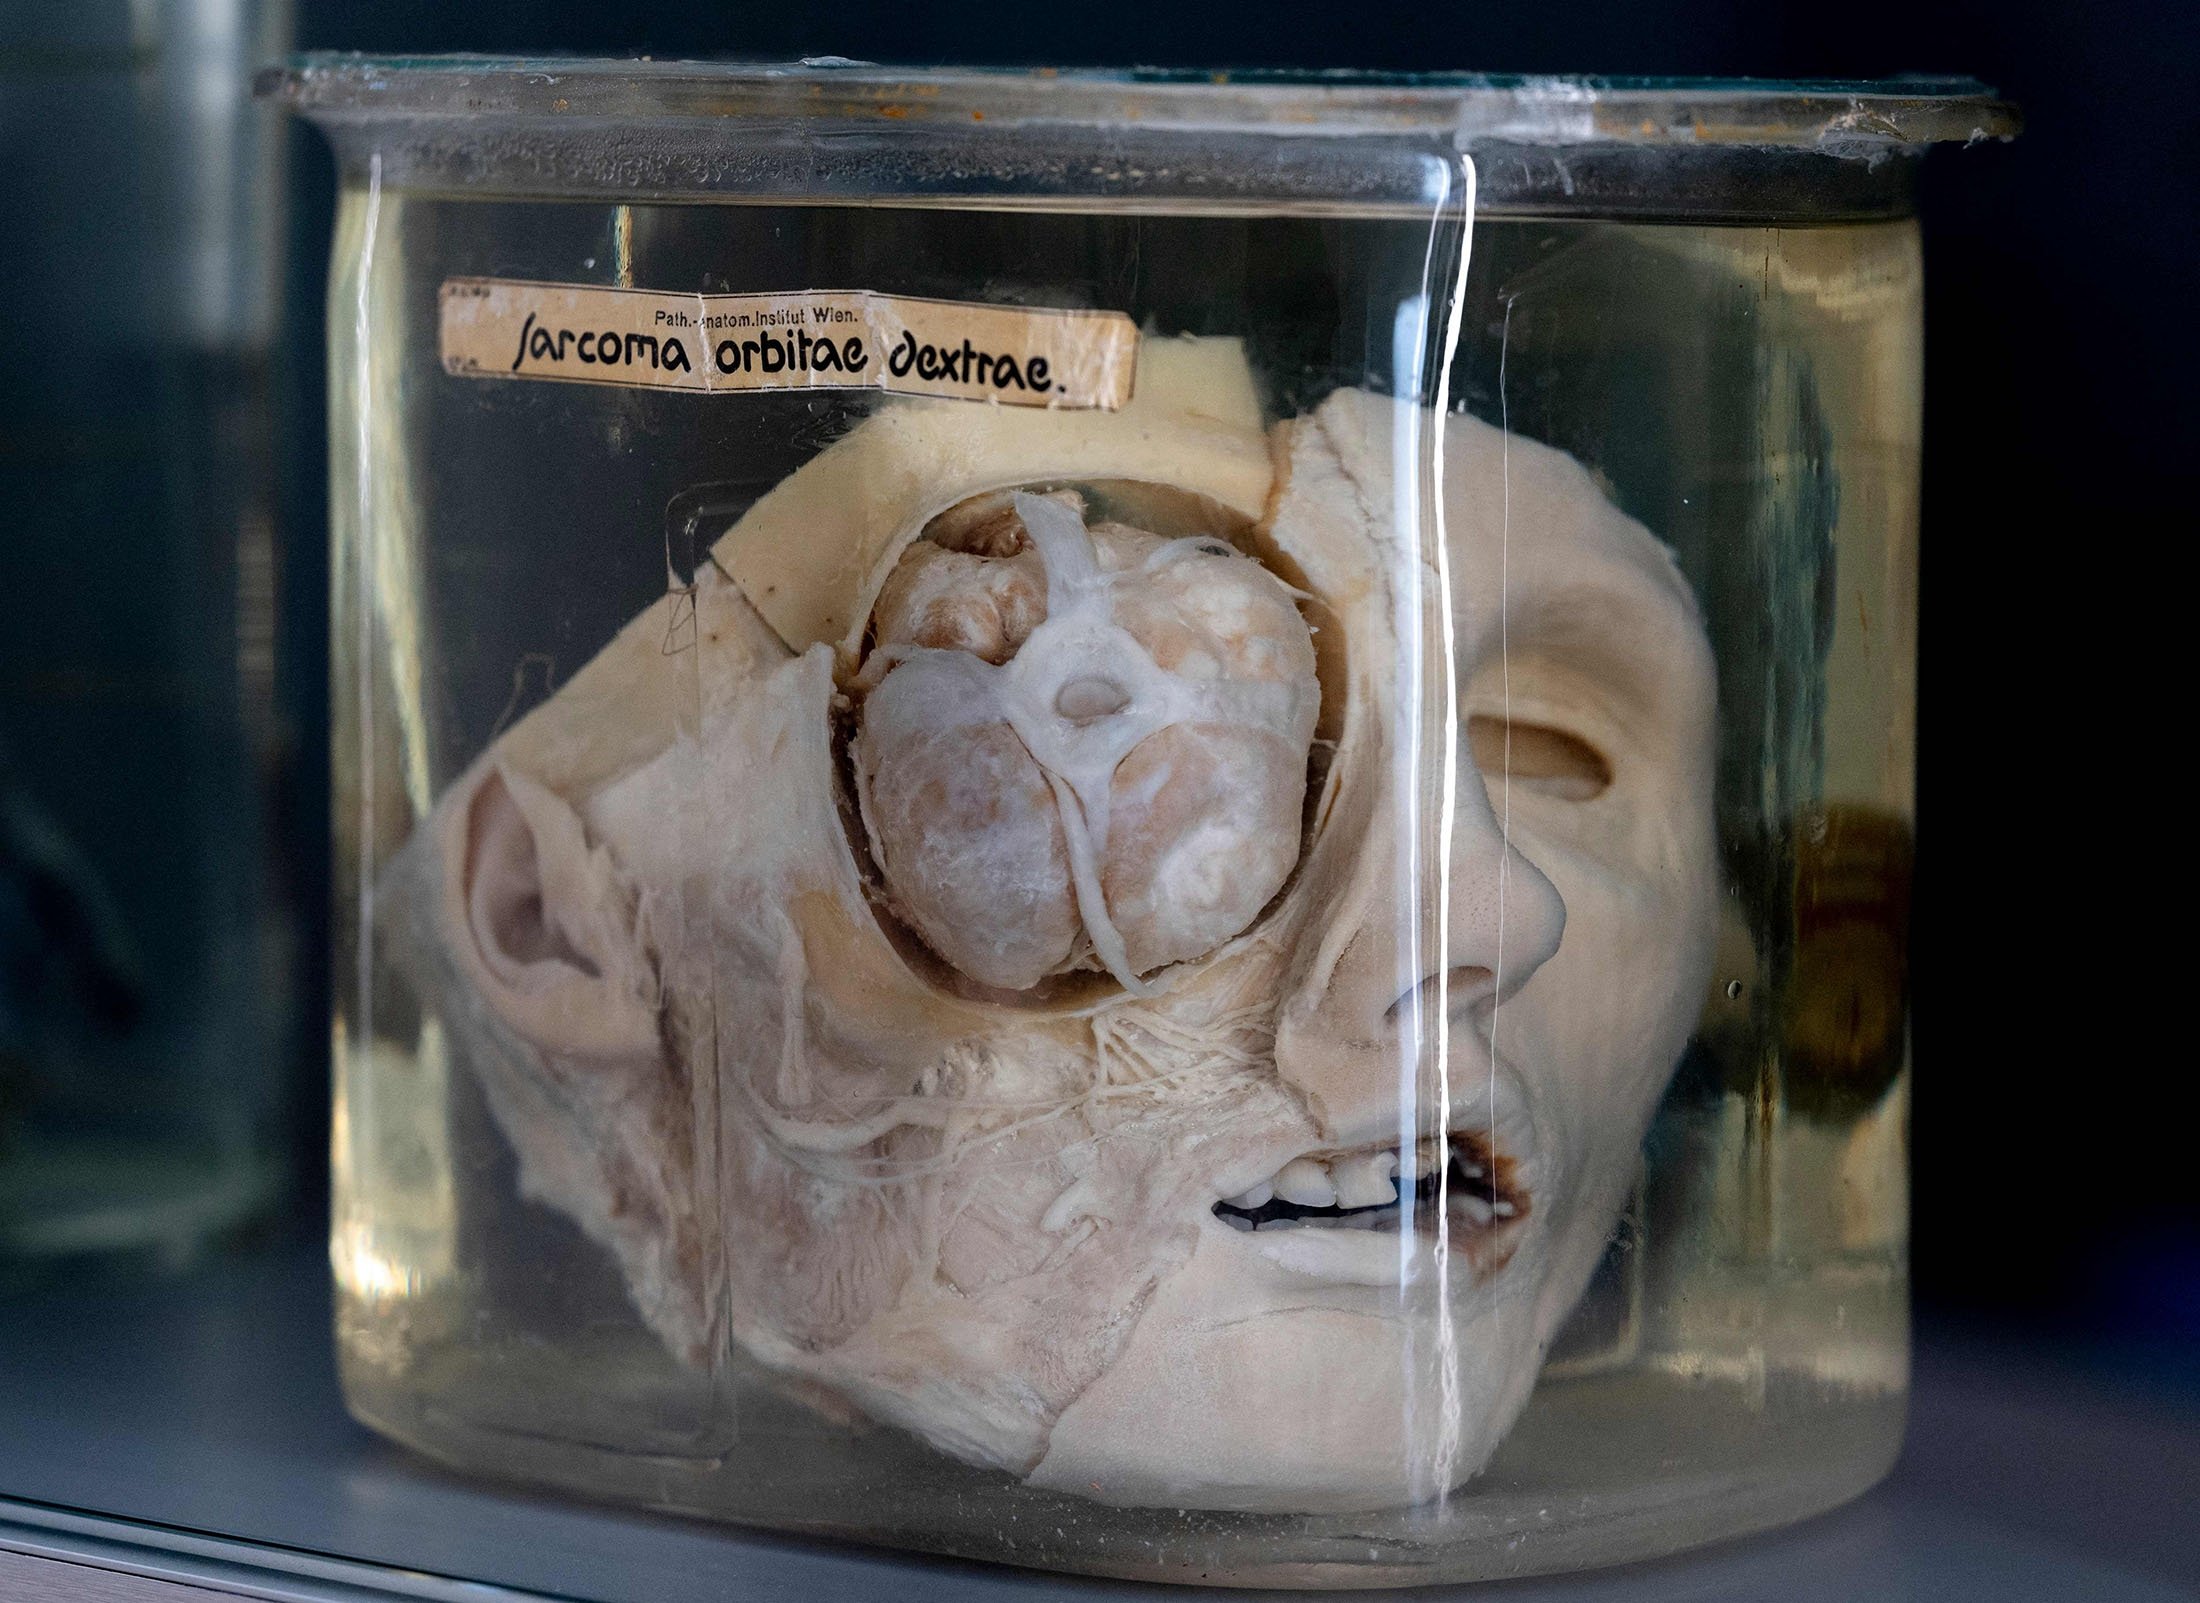 An exhibit of the anatomical pathology collection is displayed at Vienna's prestigious 'Narrenturm' Museum of Pathology in Vienna, Austria, on Oct. 20, 2021. (Photo by JOE KLAMAR / AFP)